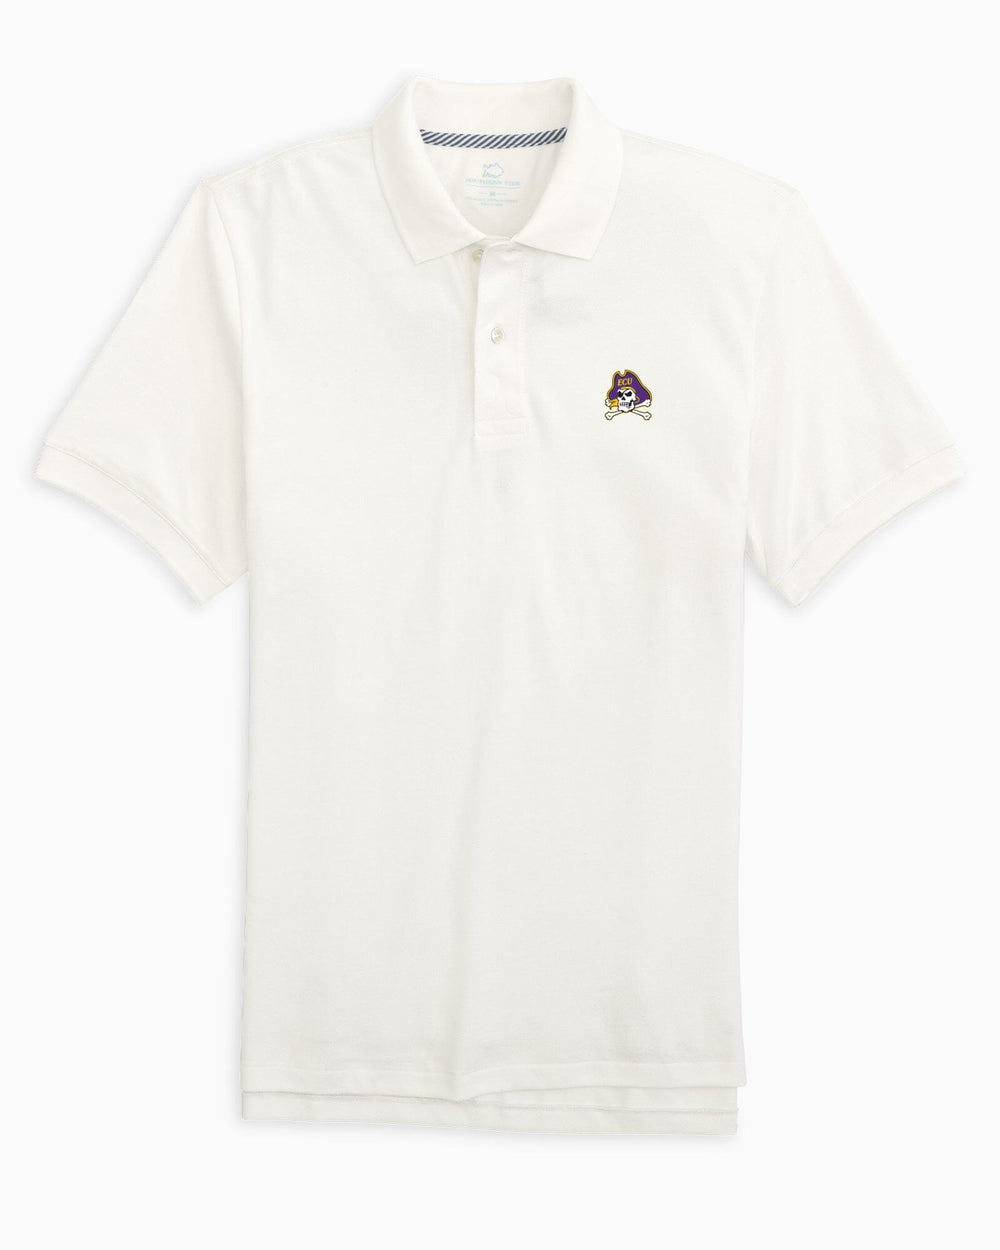 The front view of the East Carolina Pirates Skipjack Polo by Southern Tide - Classic White